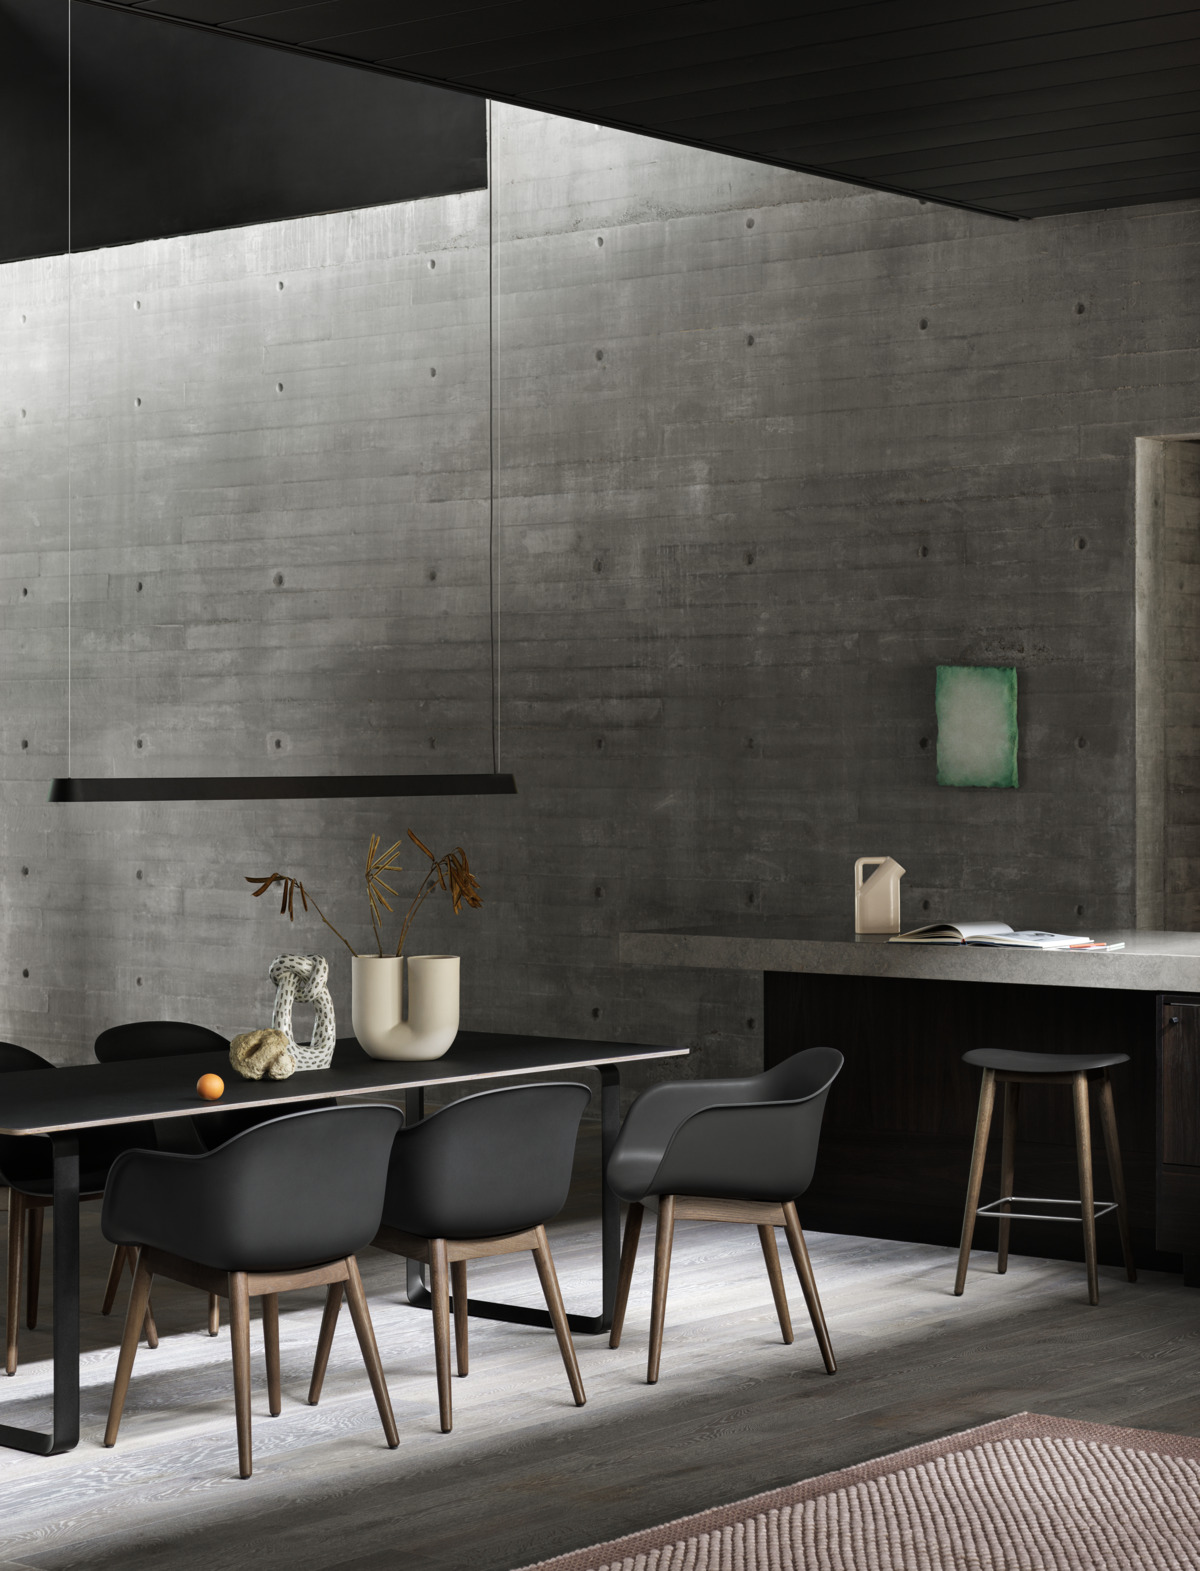 Linear Pendant Lamp 169 cm in Black, 70/70 Table in Black, Fiber Armchair w. Wood Base in Black/Stained Dark Brown, Fiber Counter Stool in Black/Stained Dark Brown